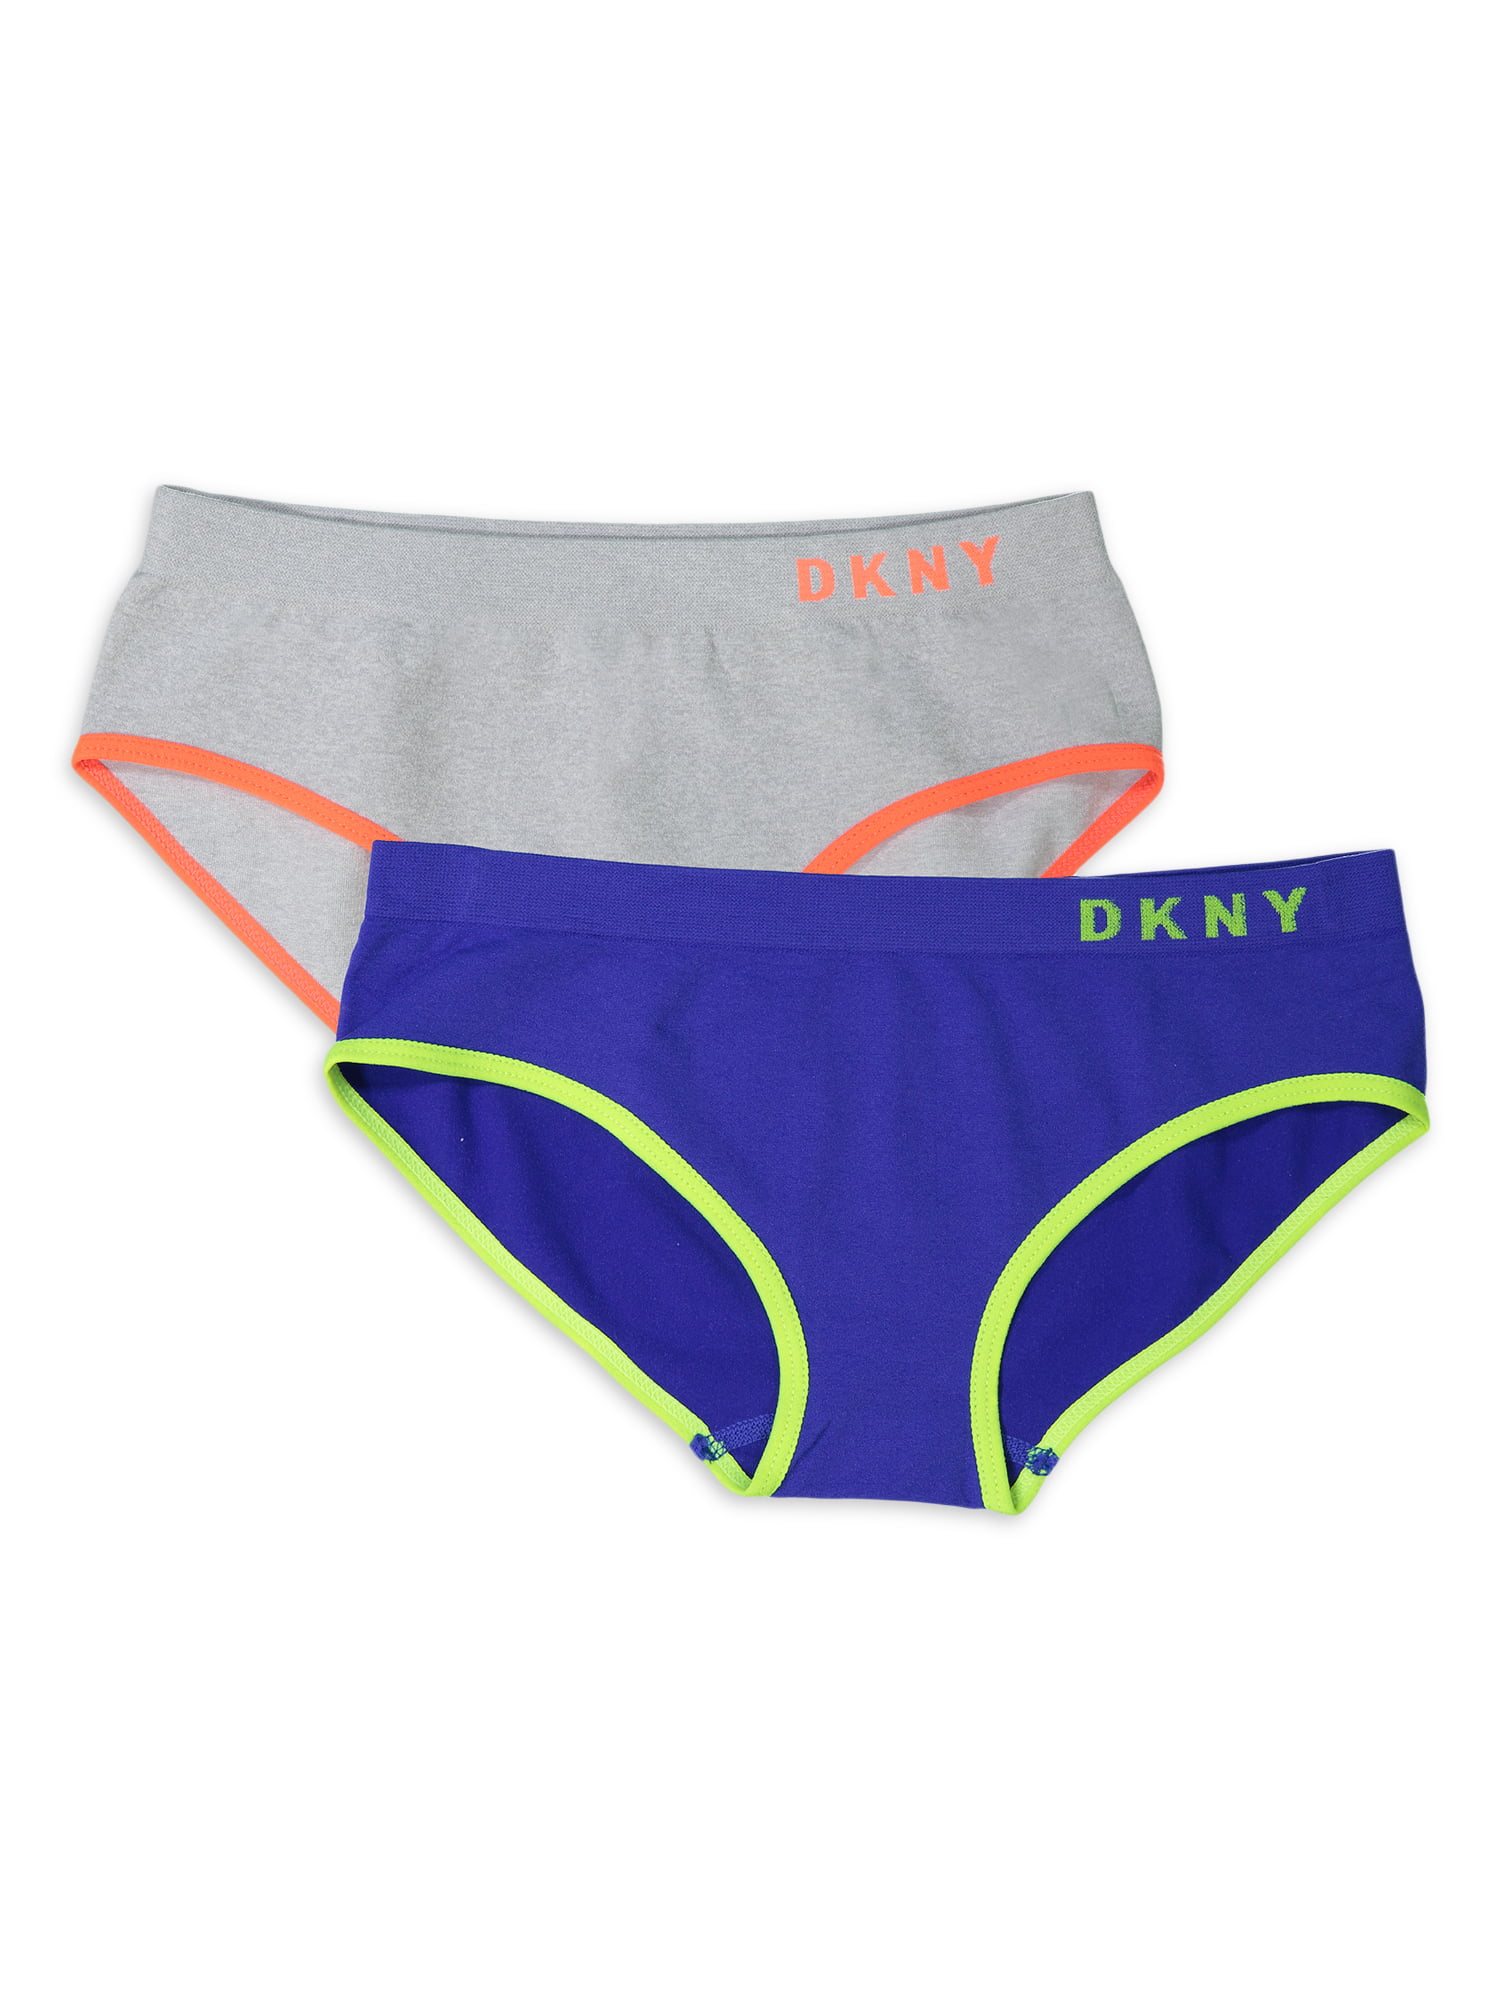 DKNY Girls Underwear, 2 Pack Hipster Seamless Panties, Sizes S